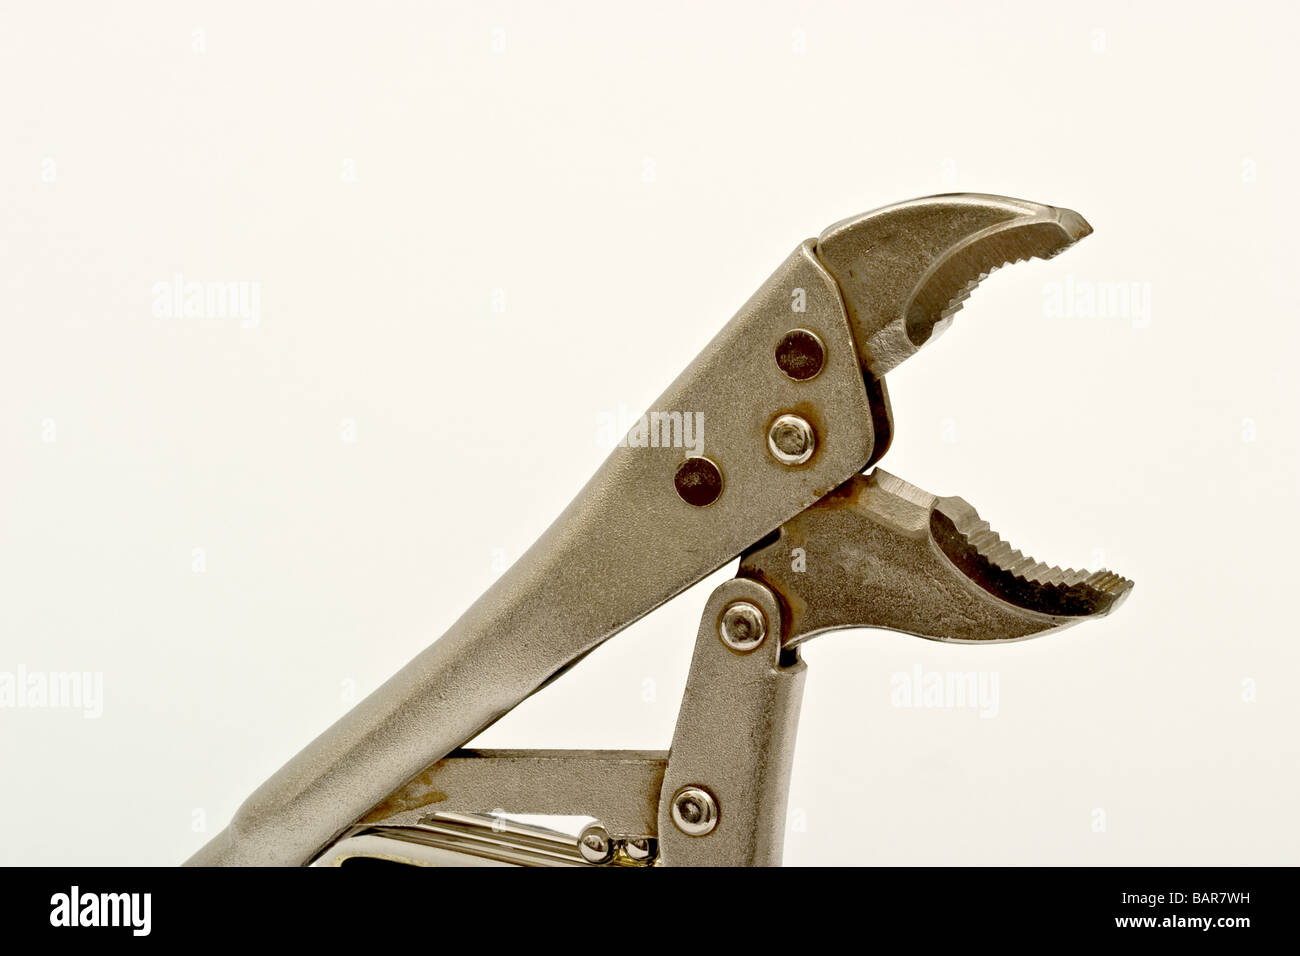 Adjustable wrench with it's jaws open Stock Photo